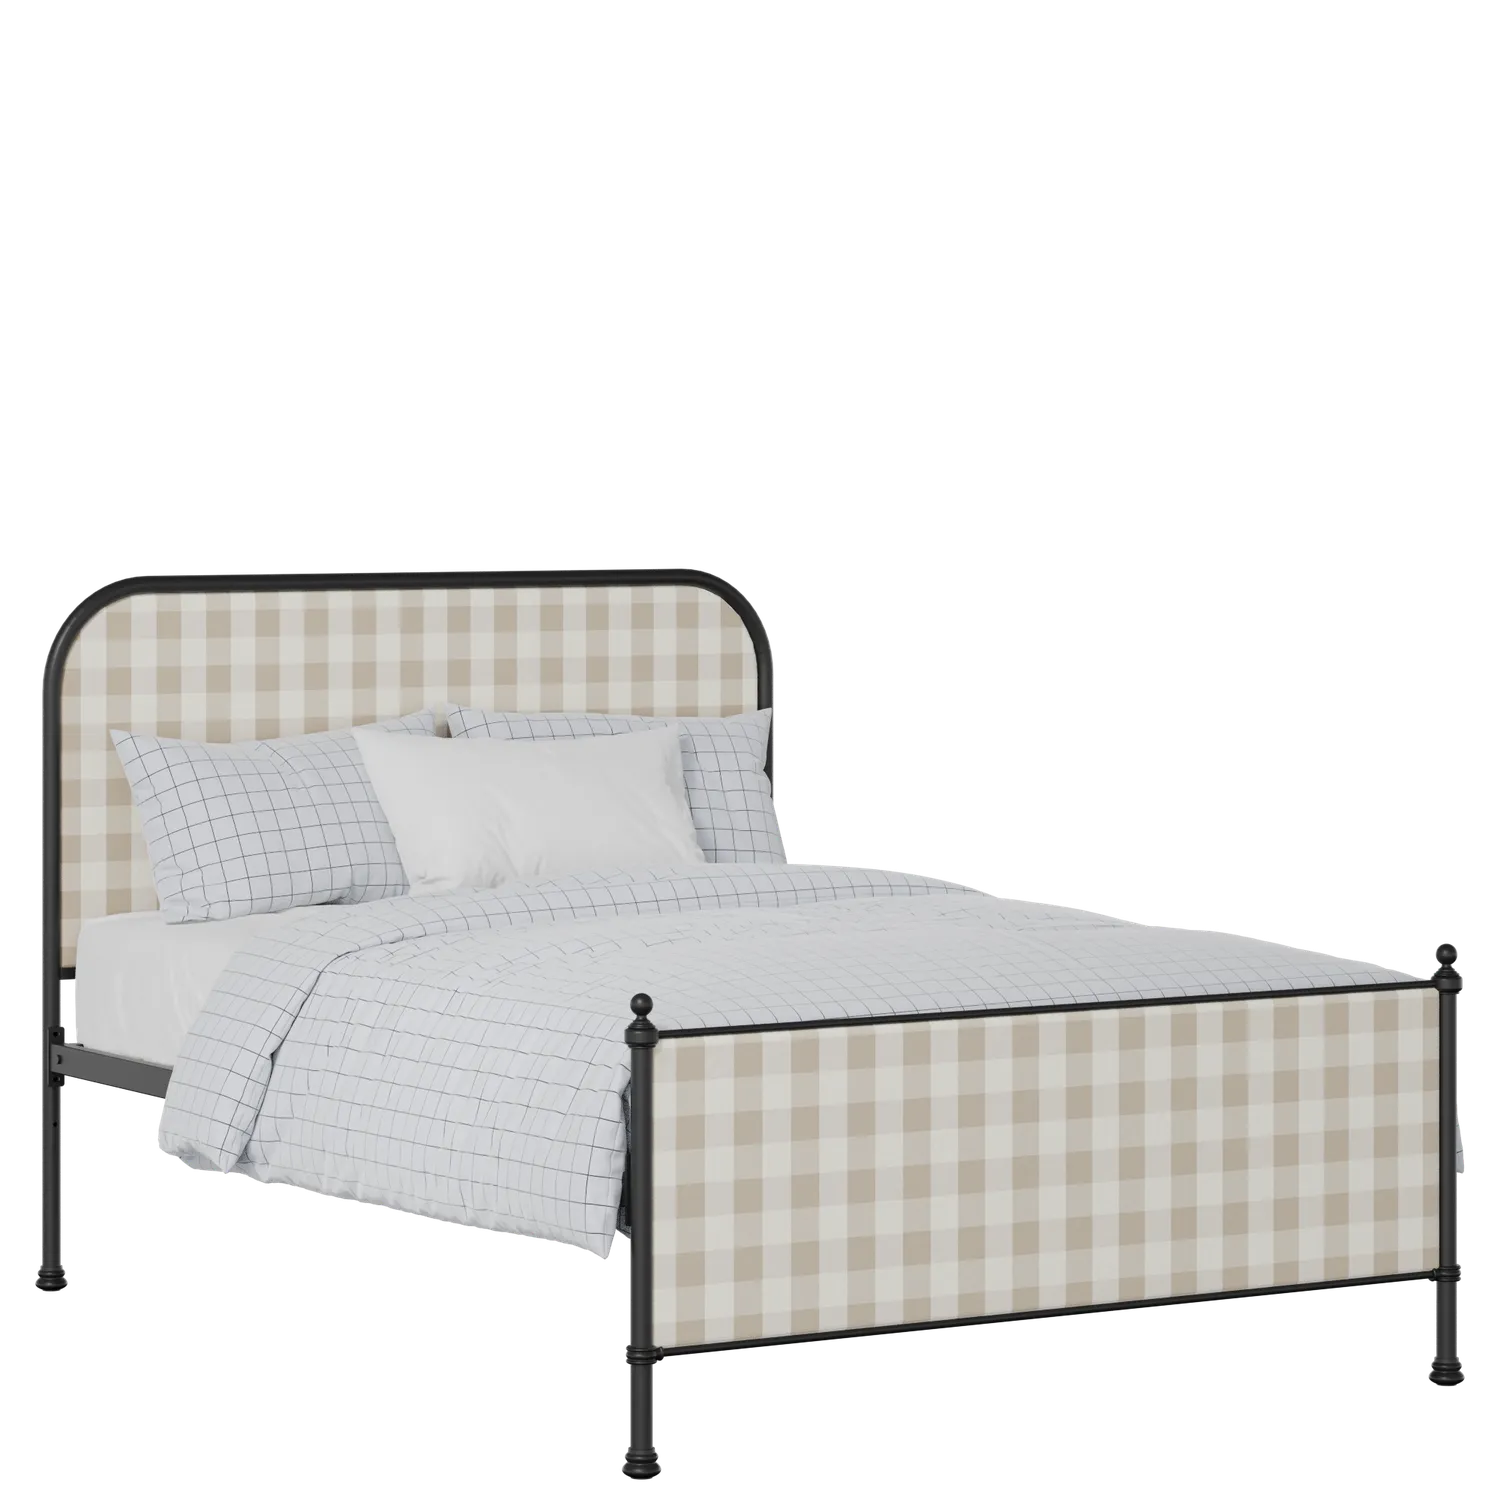 Bray iron/metal upholstered bed in black with Romo Kemble Putty fabric